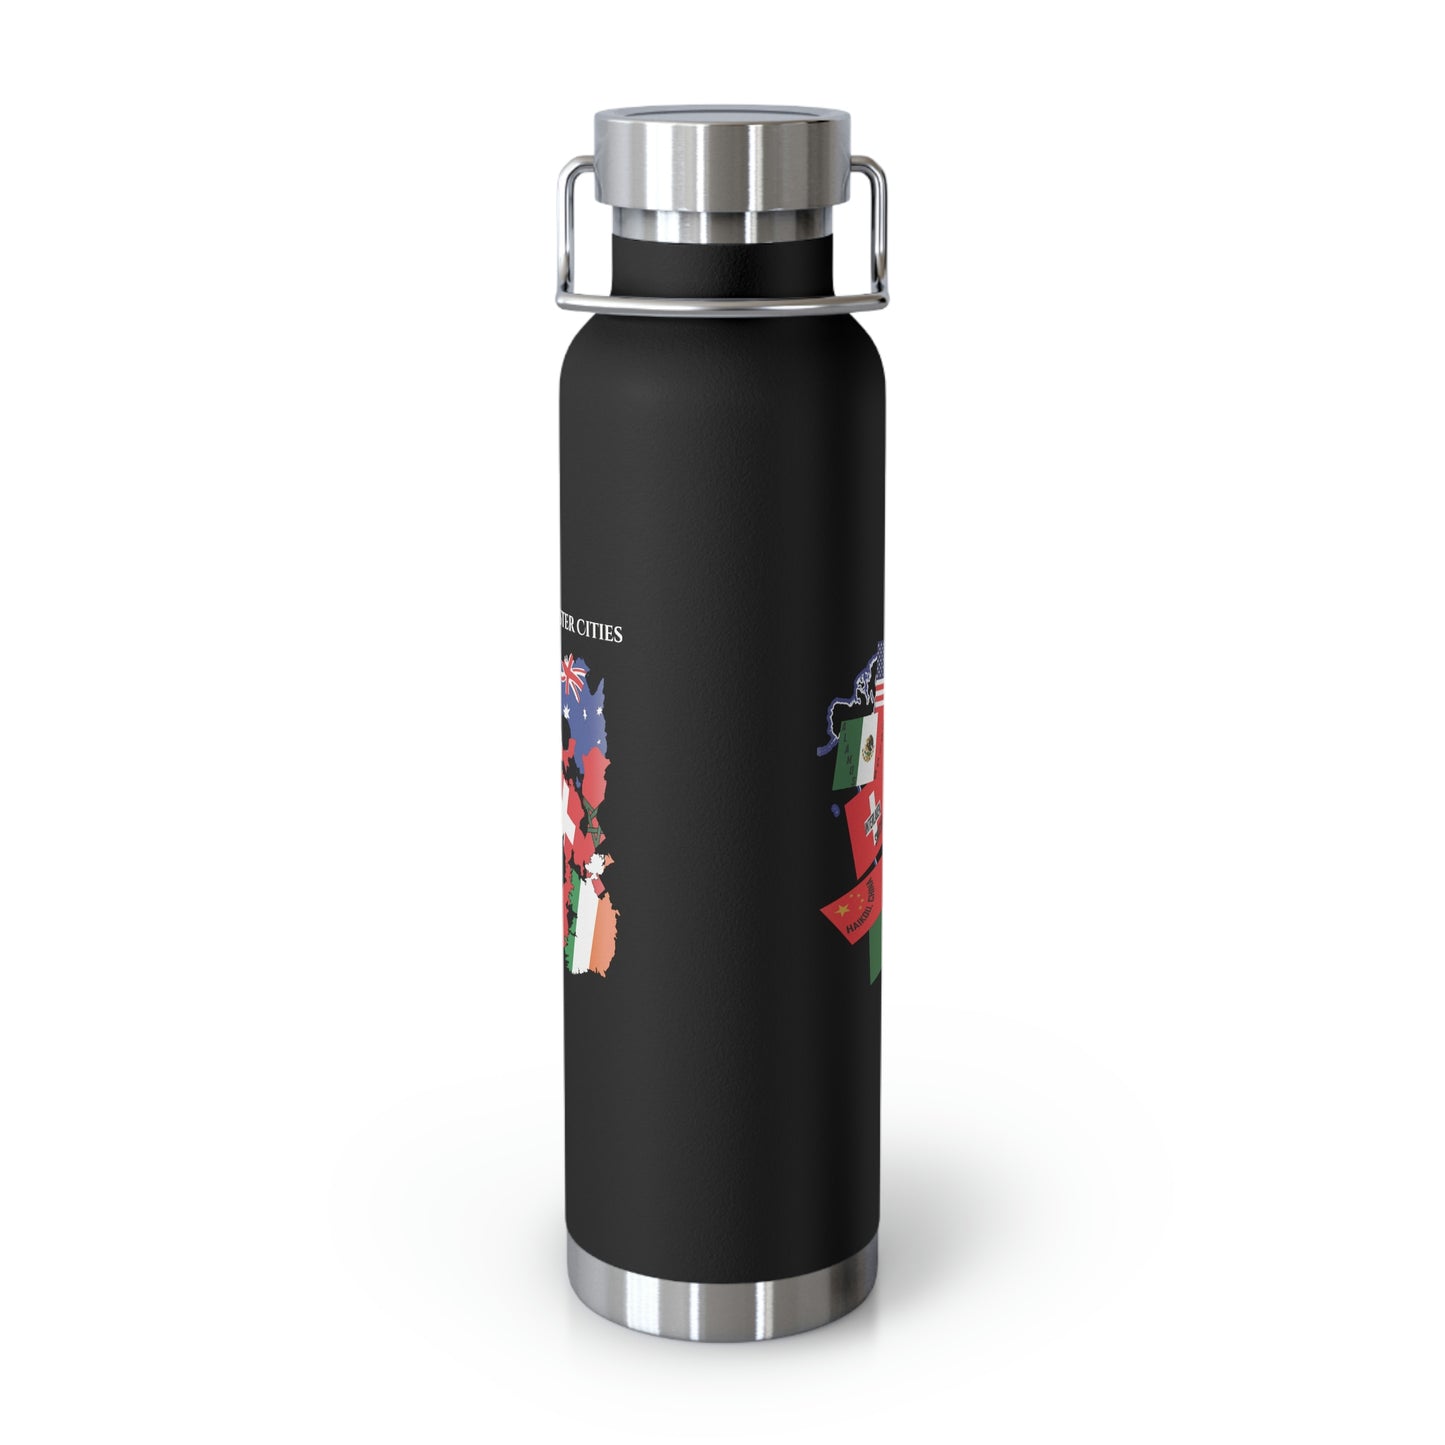 SSCA Student Art ♦ Eco-Friendly Vacuum Insulated Bottle